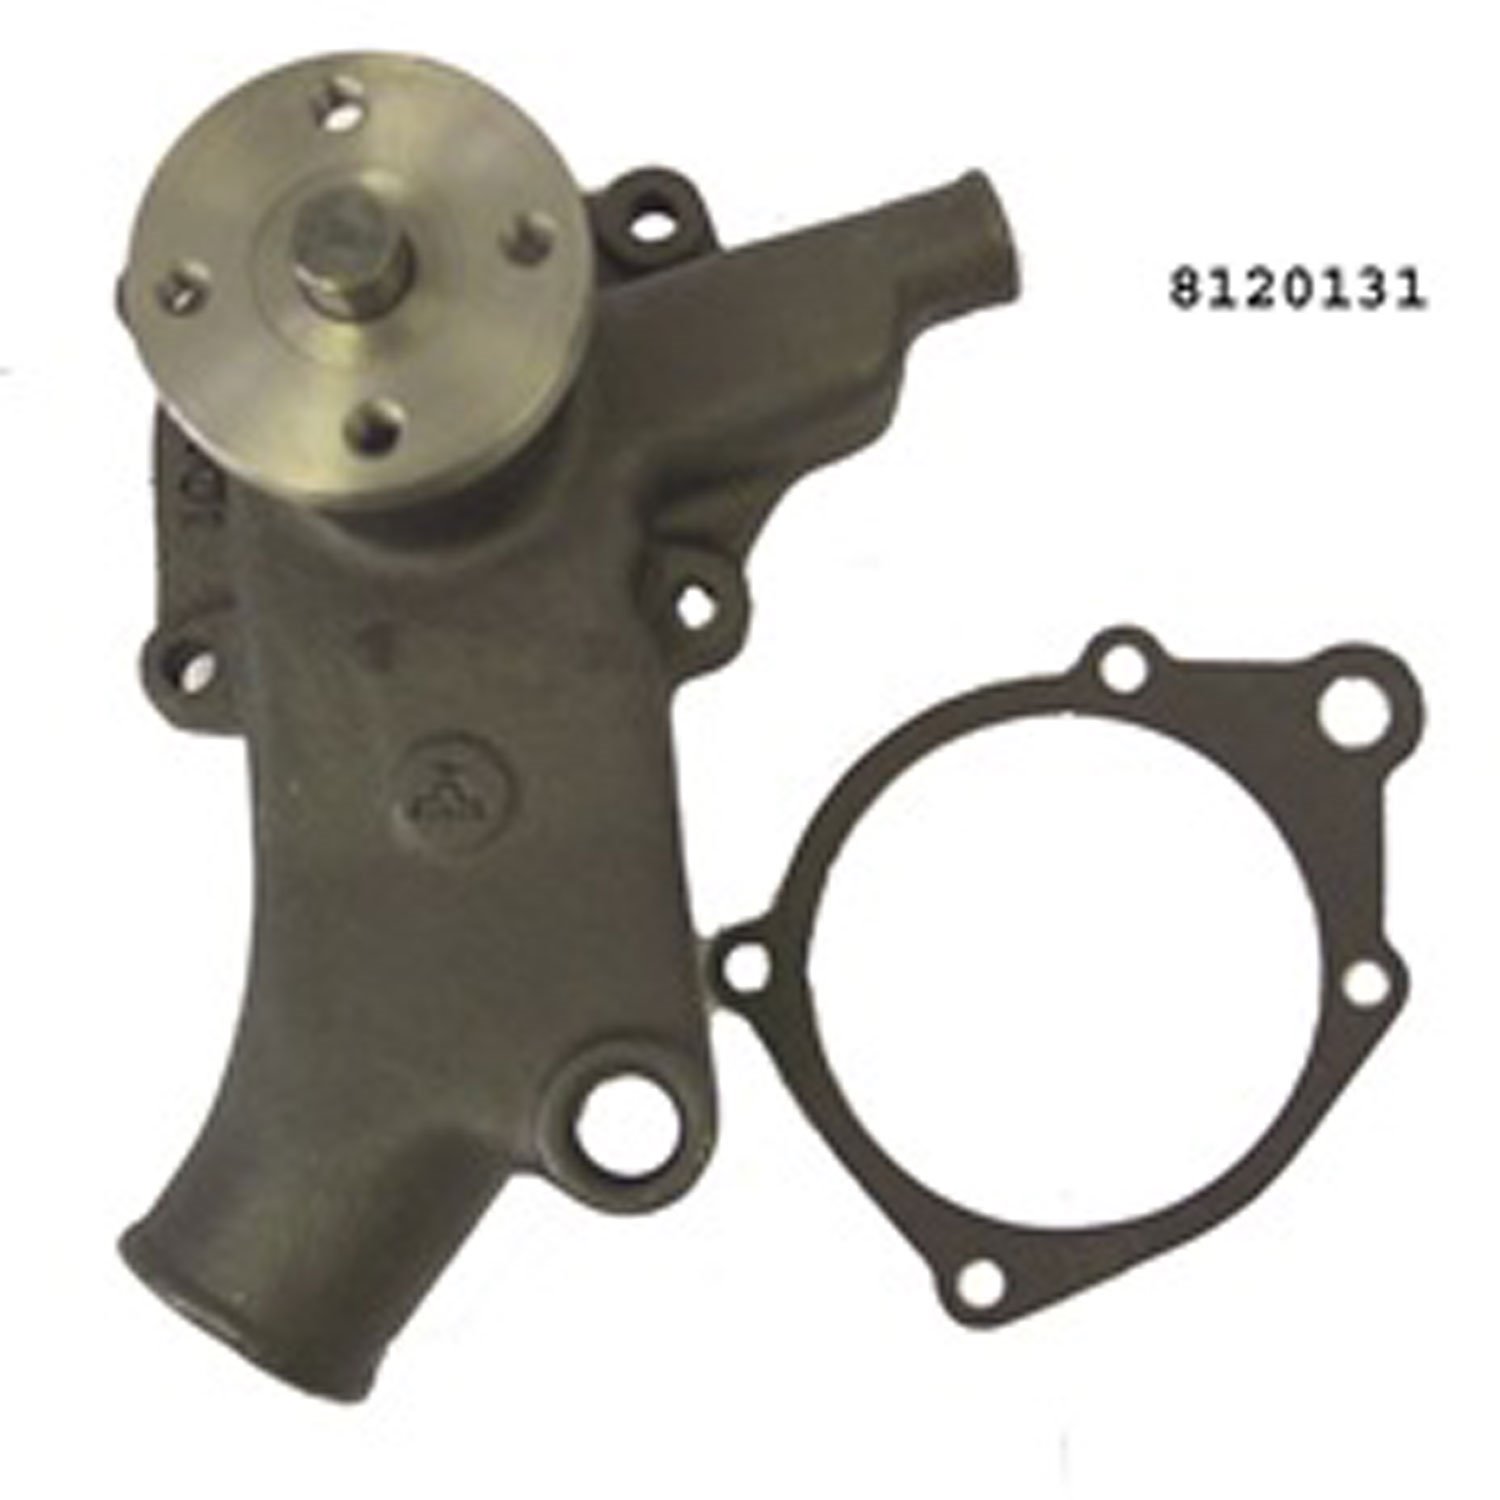 Replacement water pump from Omix-ADA, Fits 72-74 Jeep CJ5 and CJ6 with 232 or 258 cubic inch engines.